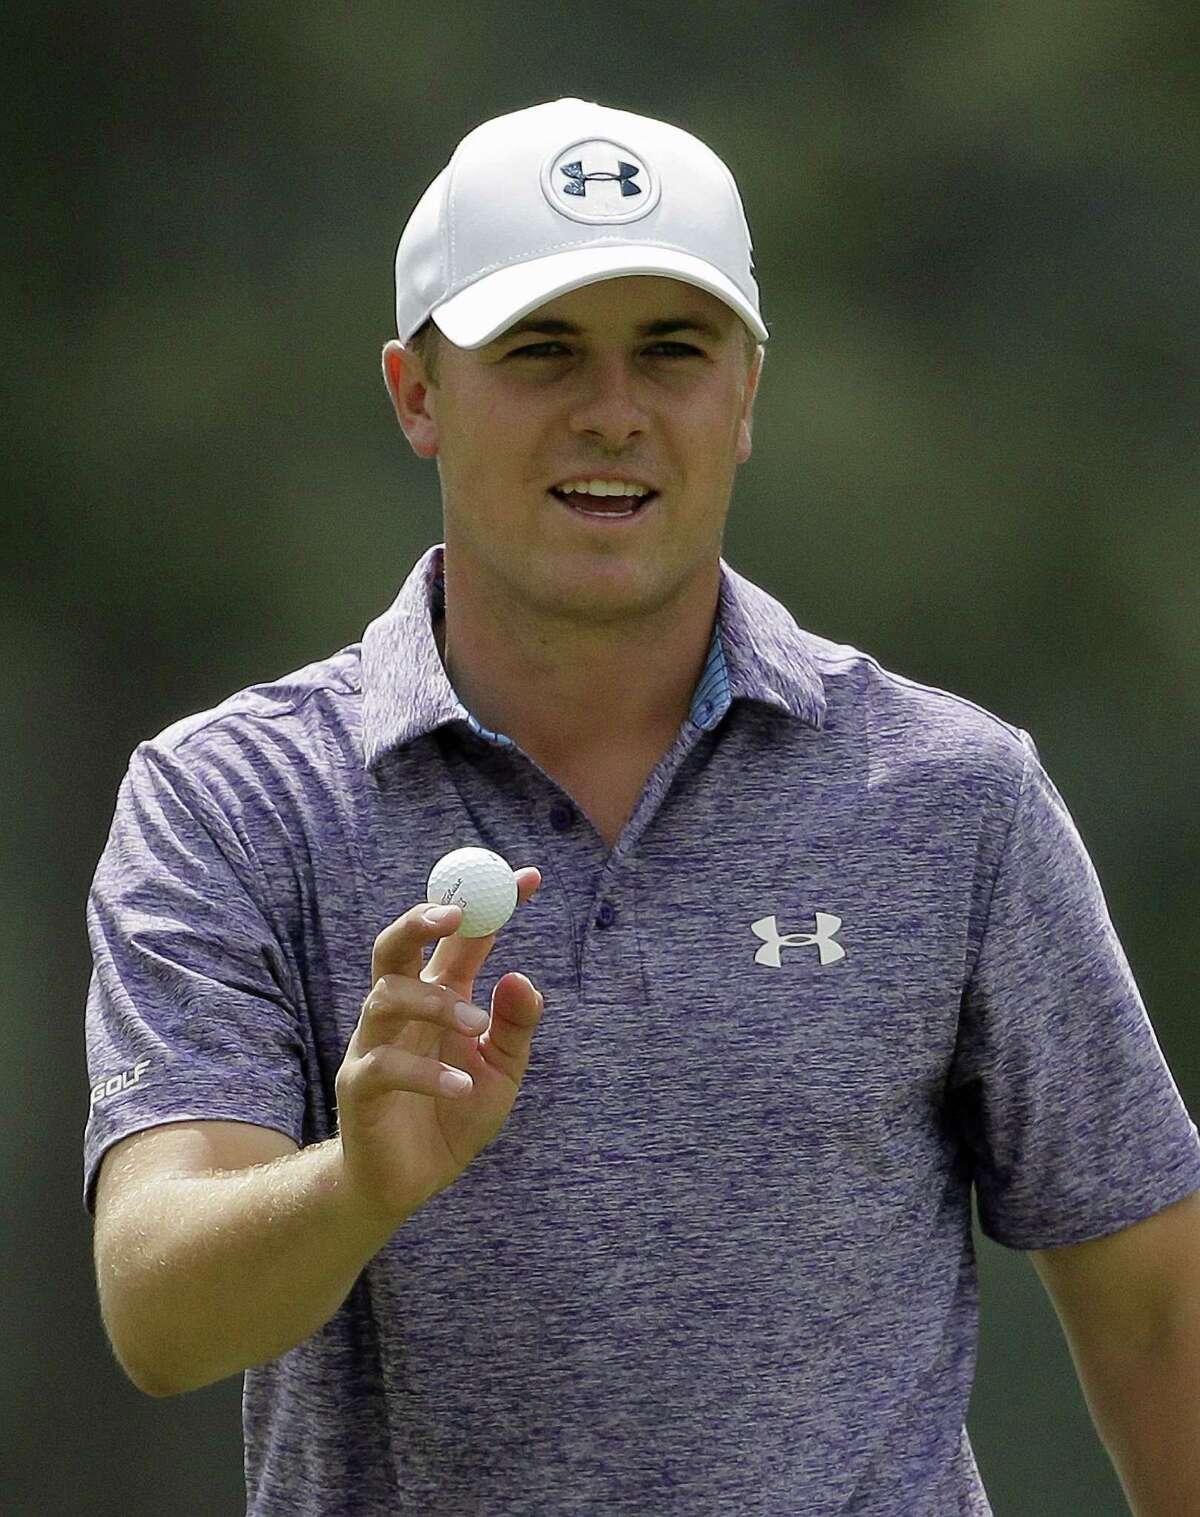 Jordan Spieth holds up his ball after a biride on the eighth hole during the second round of the Masters golf tournament Friday, April 10, 2015, in Augusta, Ga. (AP Photo/Chris Carlson)